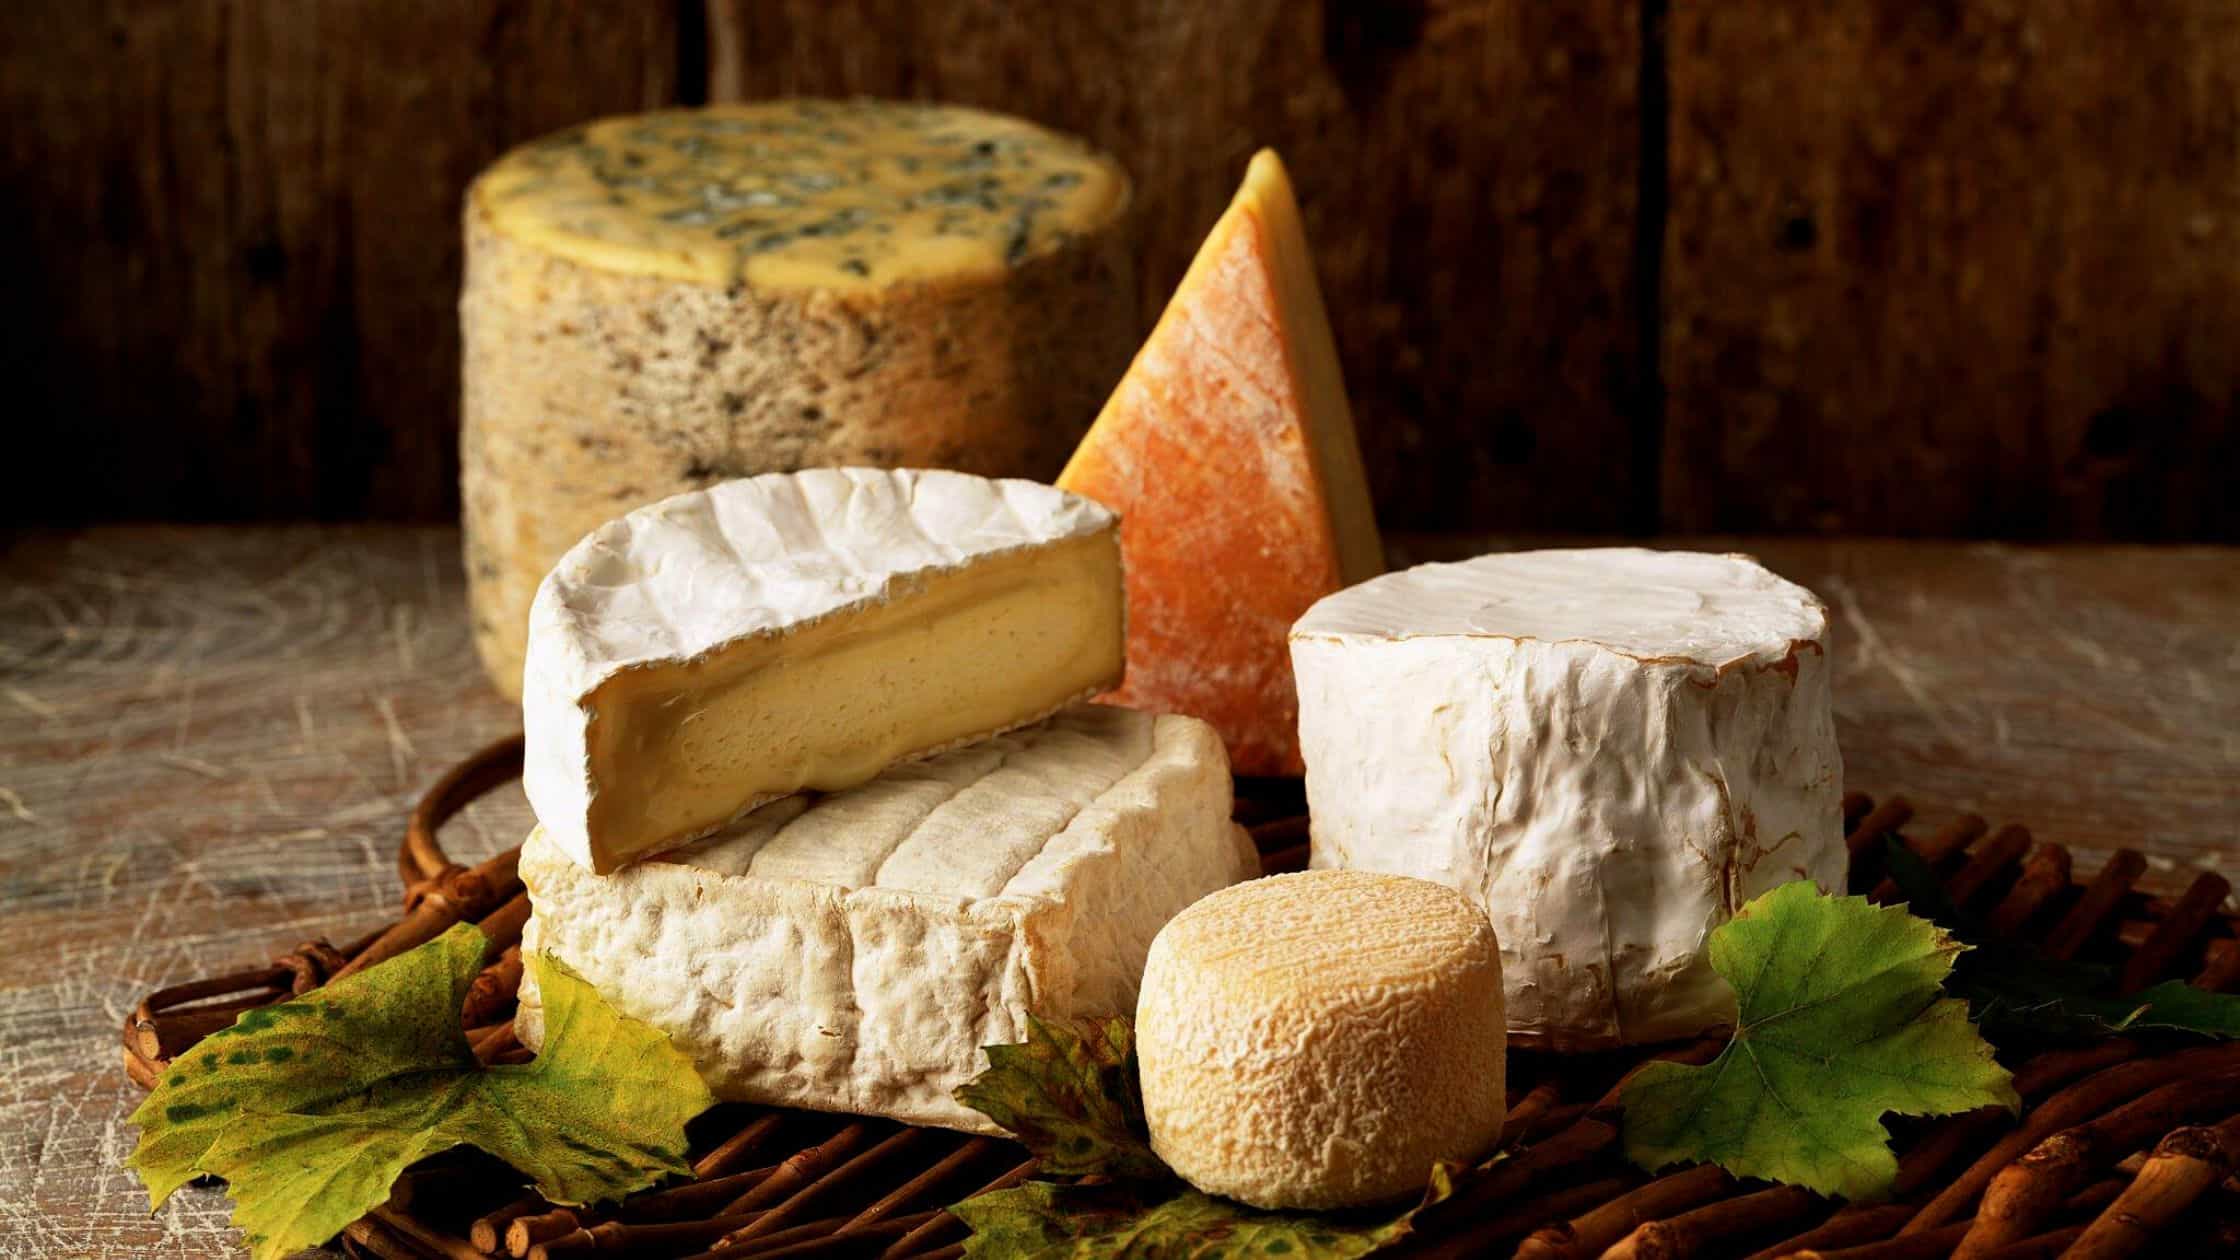 Cheese Varieties Low In Cholesterol And Fat - Pick The Right One!